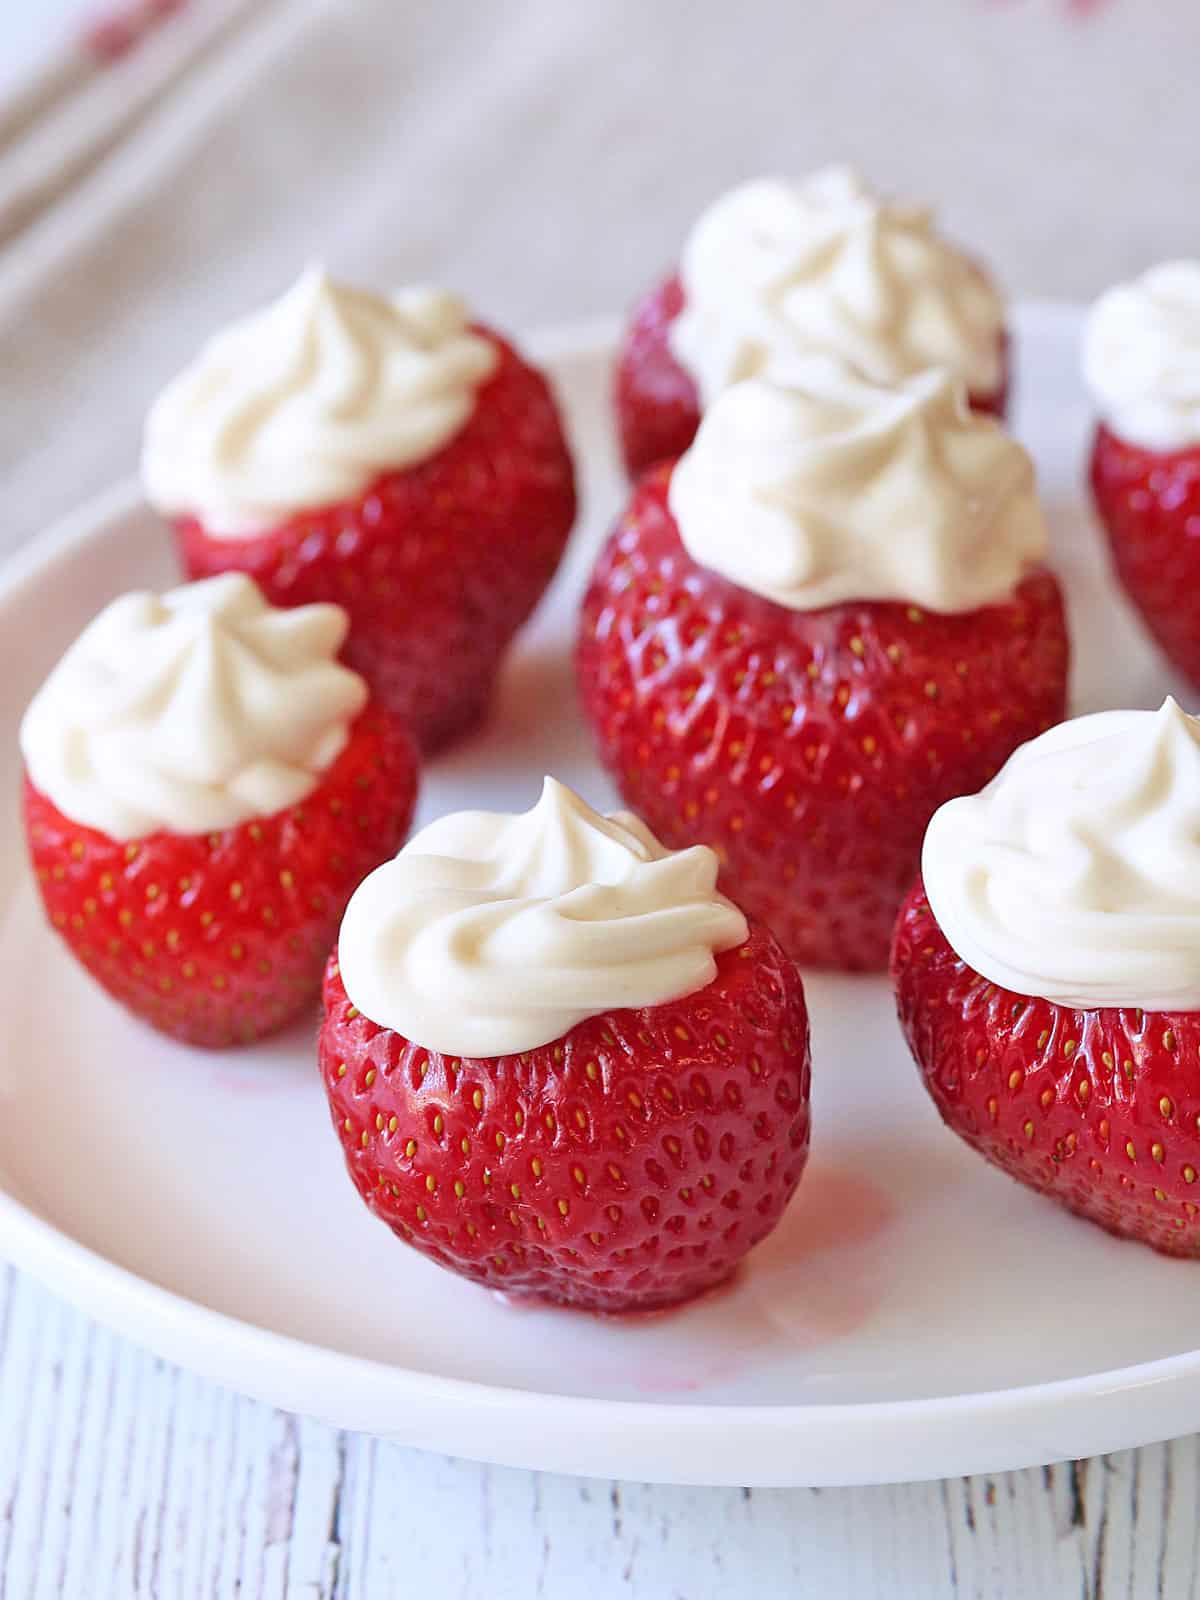 Cheesecake-stuffed strawberries are served on a white plate.